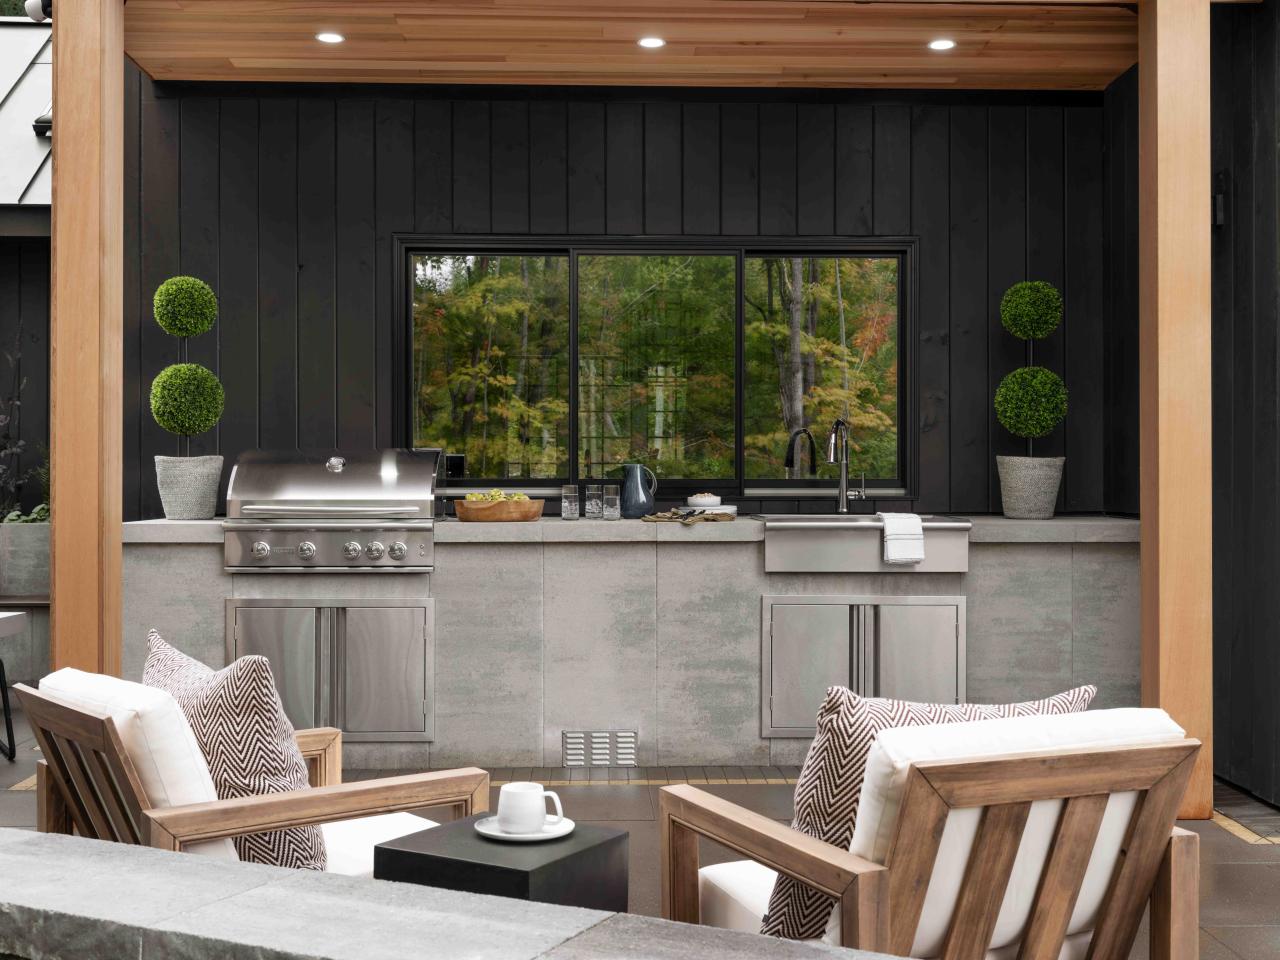 How to Plan and Build an Outdoor Kitchen   HGTV